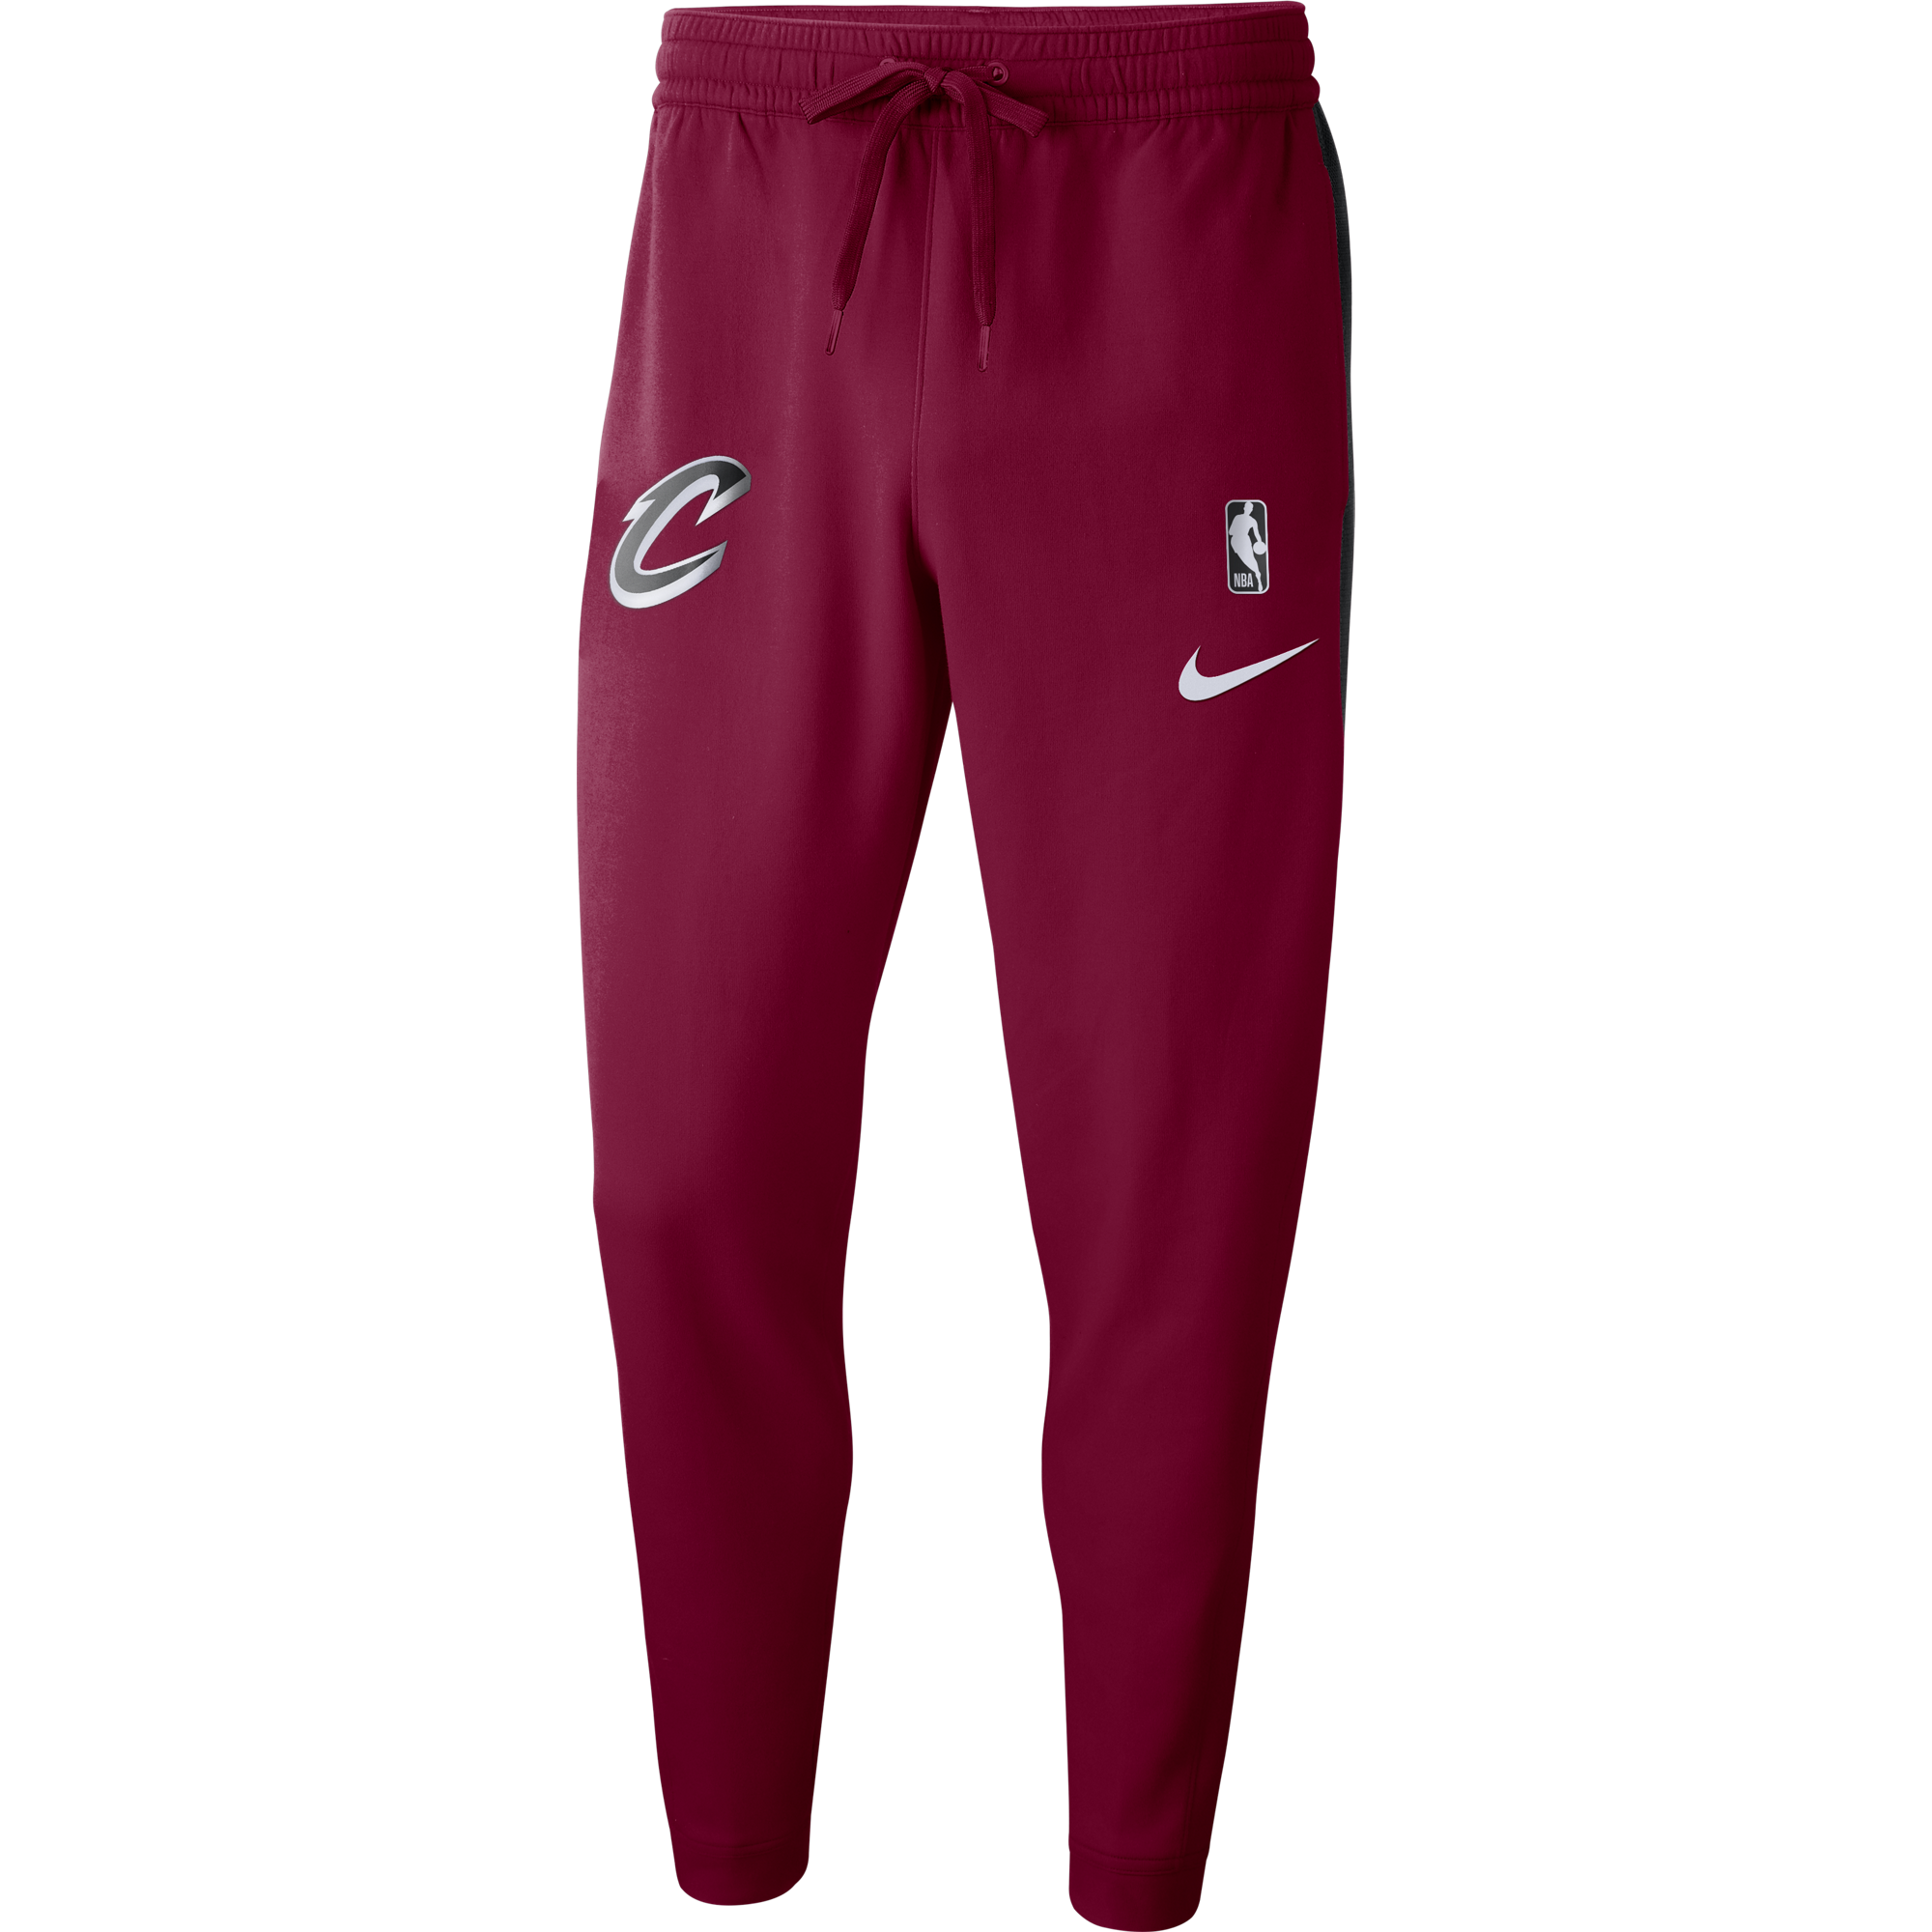 NIKE NBA CLEVELAND CAVALIERS SHOWTIME DRY PANTS TEAM RED